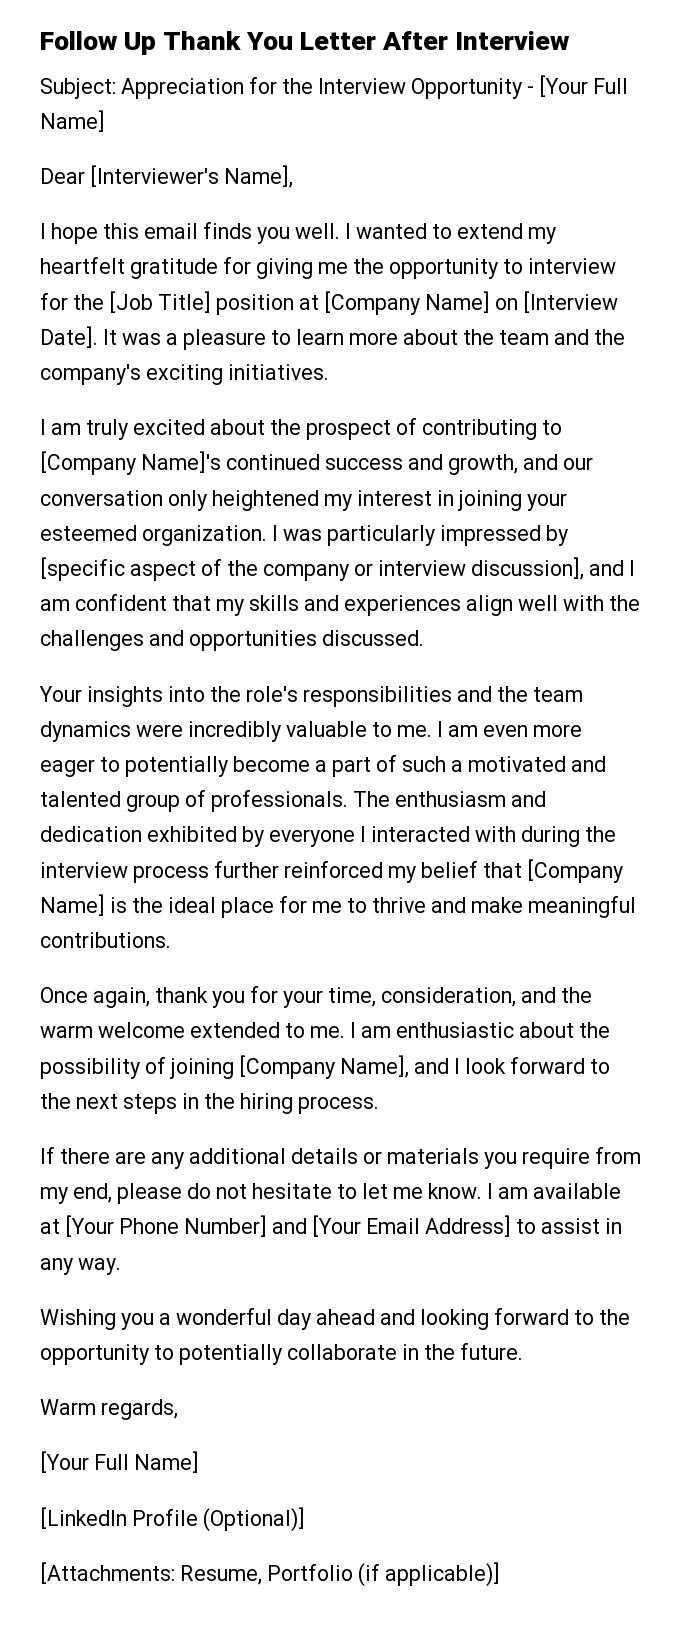 Follow Up Thank You Letter After Interview